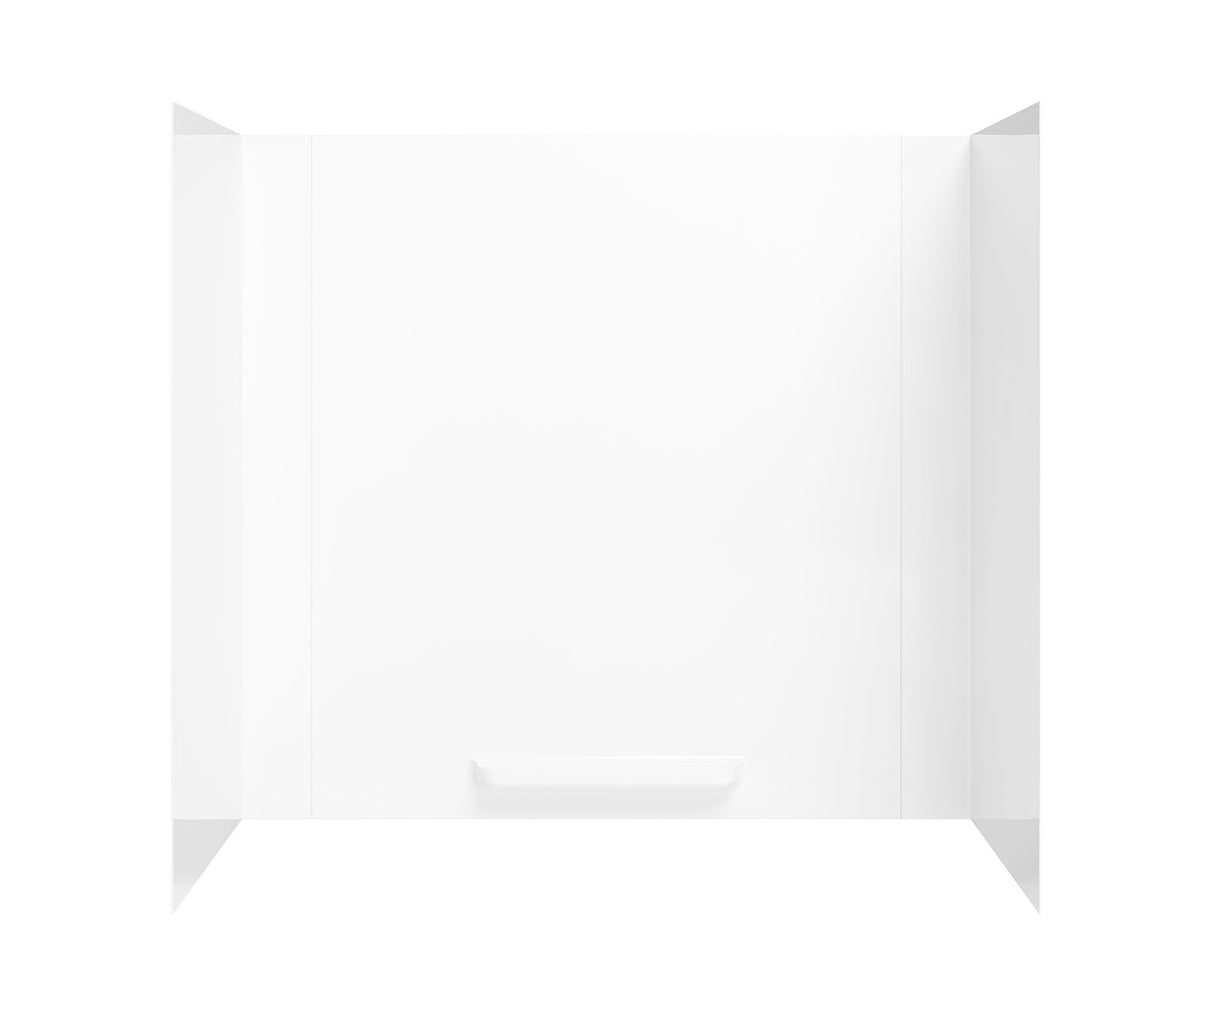 Swanstone GN-58 30 x 60 x 58 Veritek Smooth Glue up Tub Wall Kit in White GN58000.010